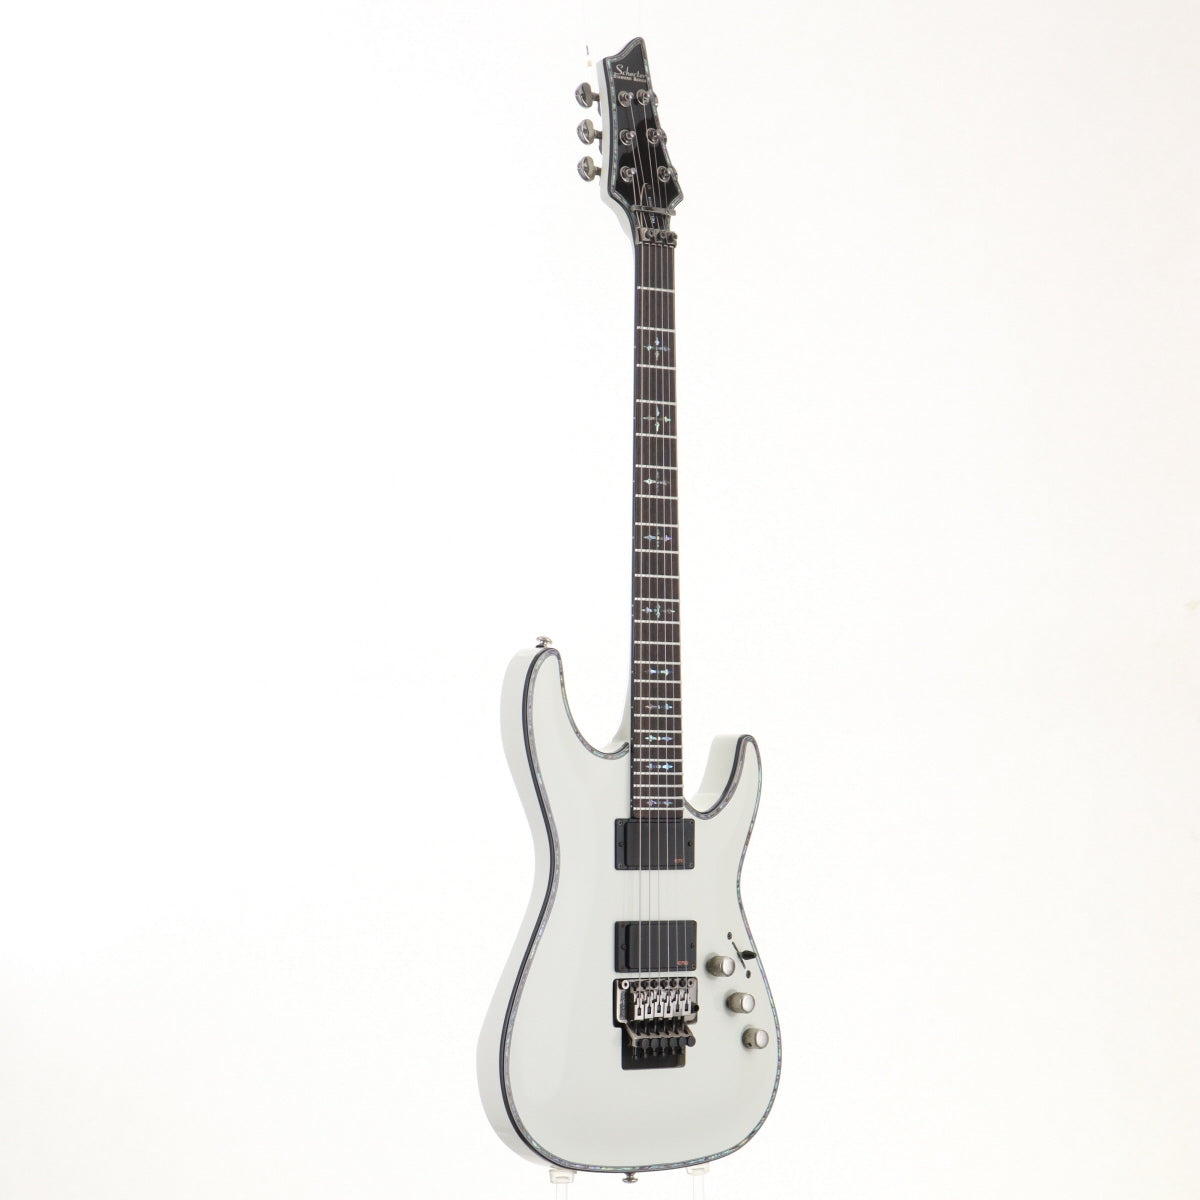 [SN W10122318] USED SCHECTER / AD-C-1-FR-HR White (Active) [3.67kg] Schecter Electric Guitar [08]